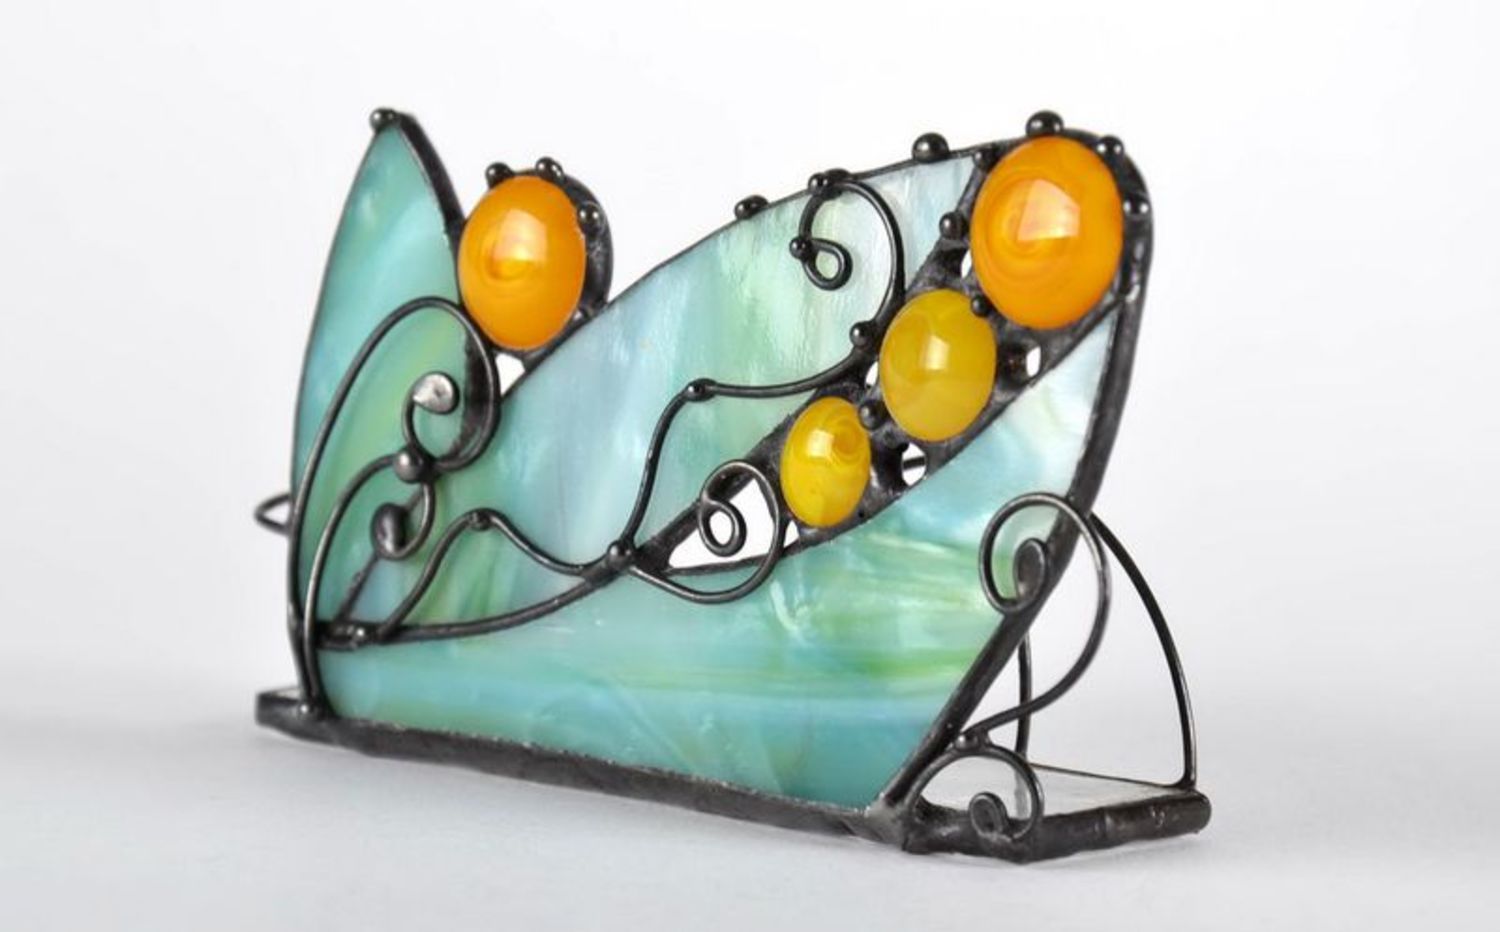 Stained glass business cards holder photo 1